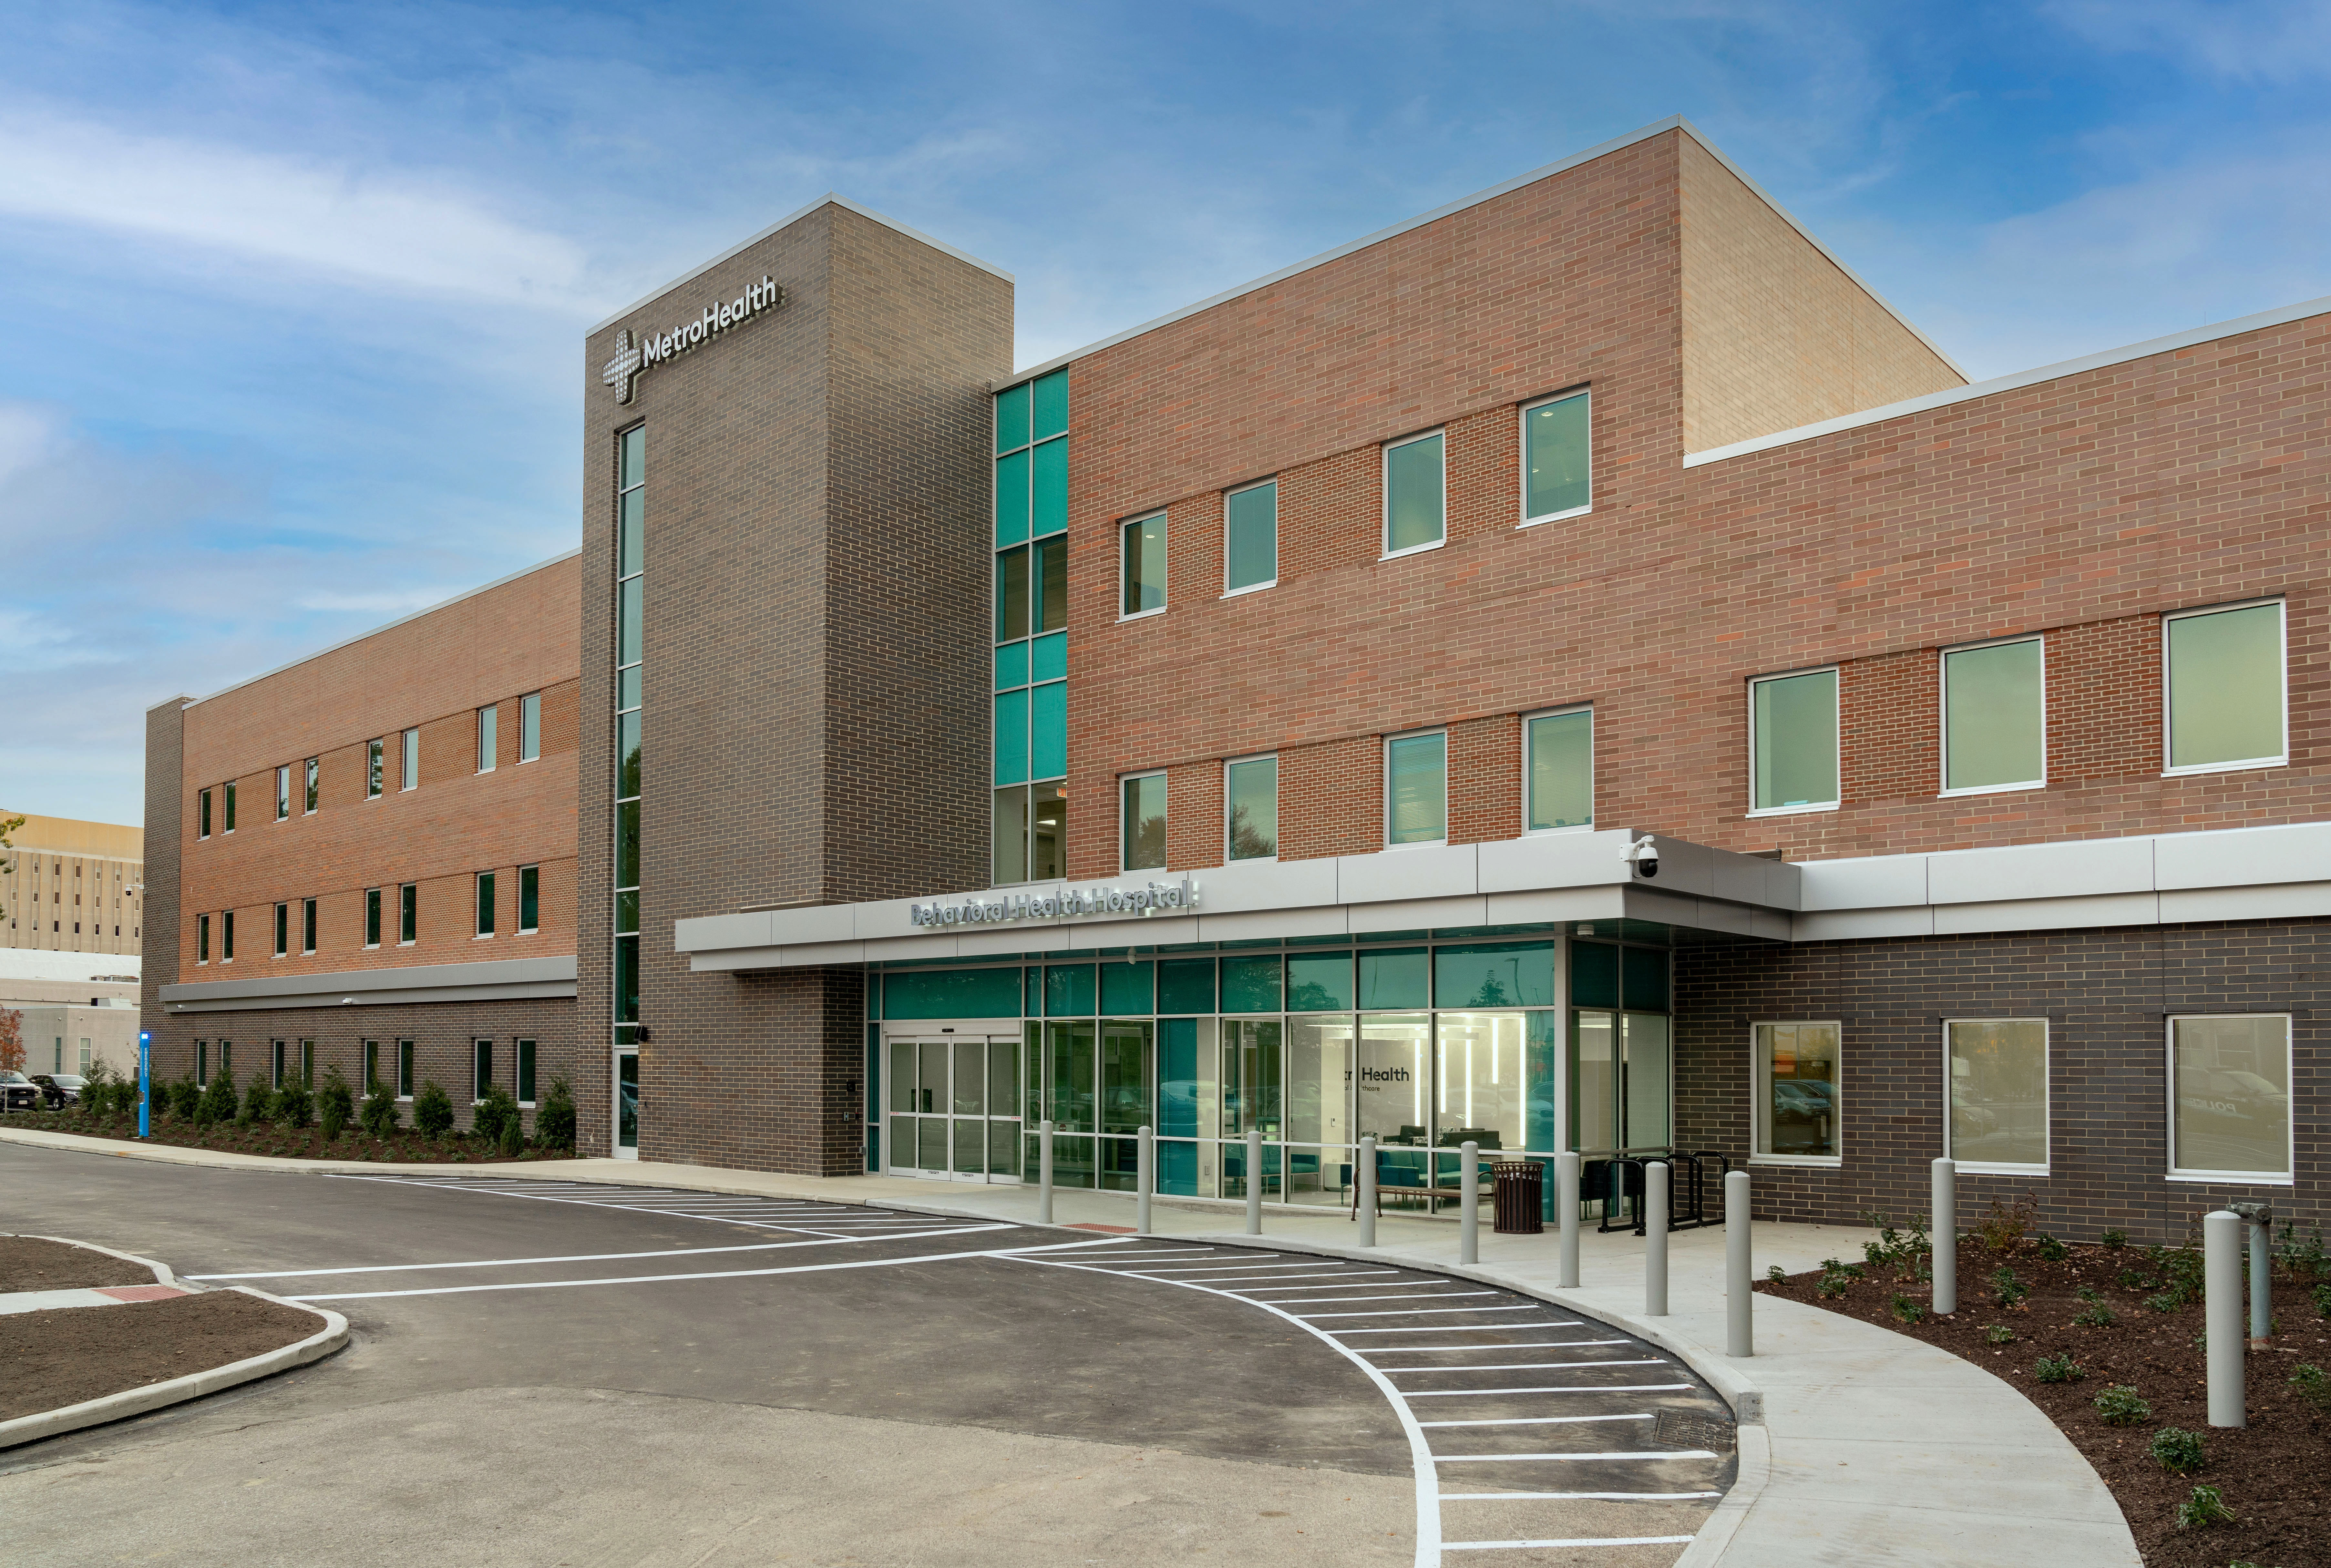 News Release: Grand Opening of 100,000 Square Foot, 112 Bed Inpatient Behavioral Health Facility Marks Anchor Health Properties Milestone